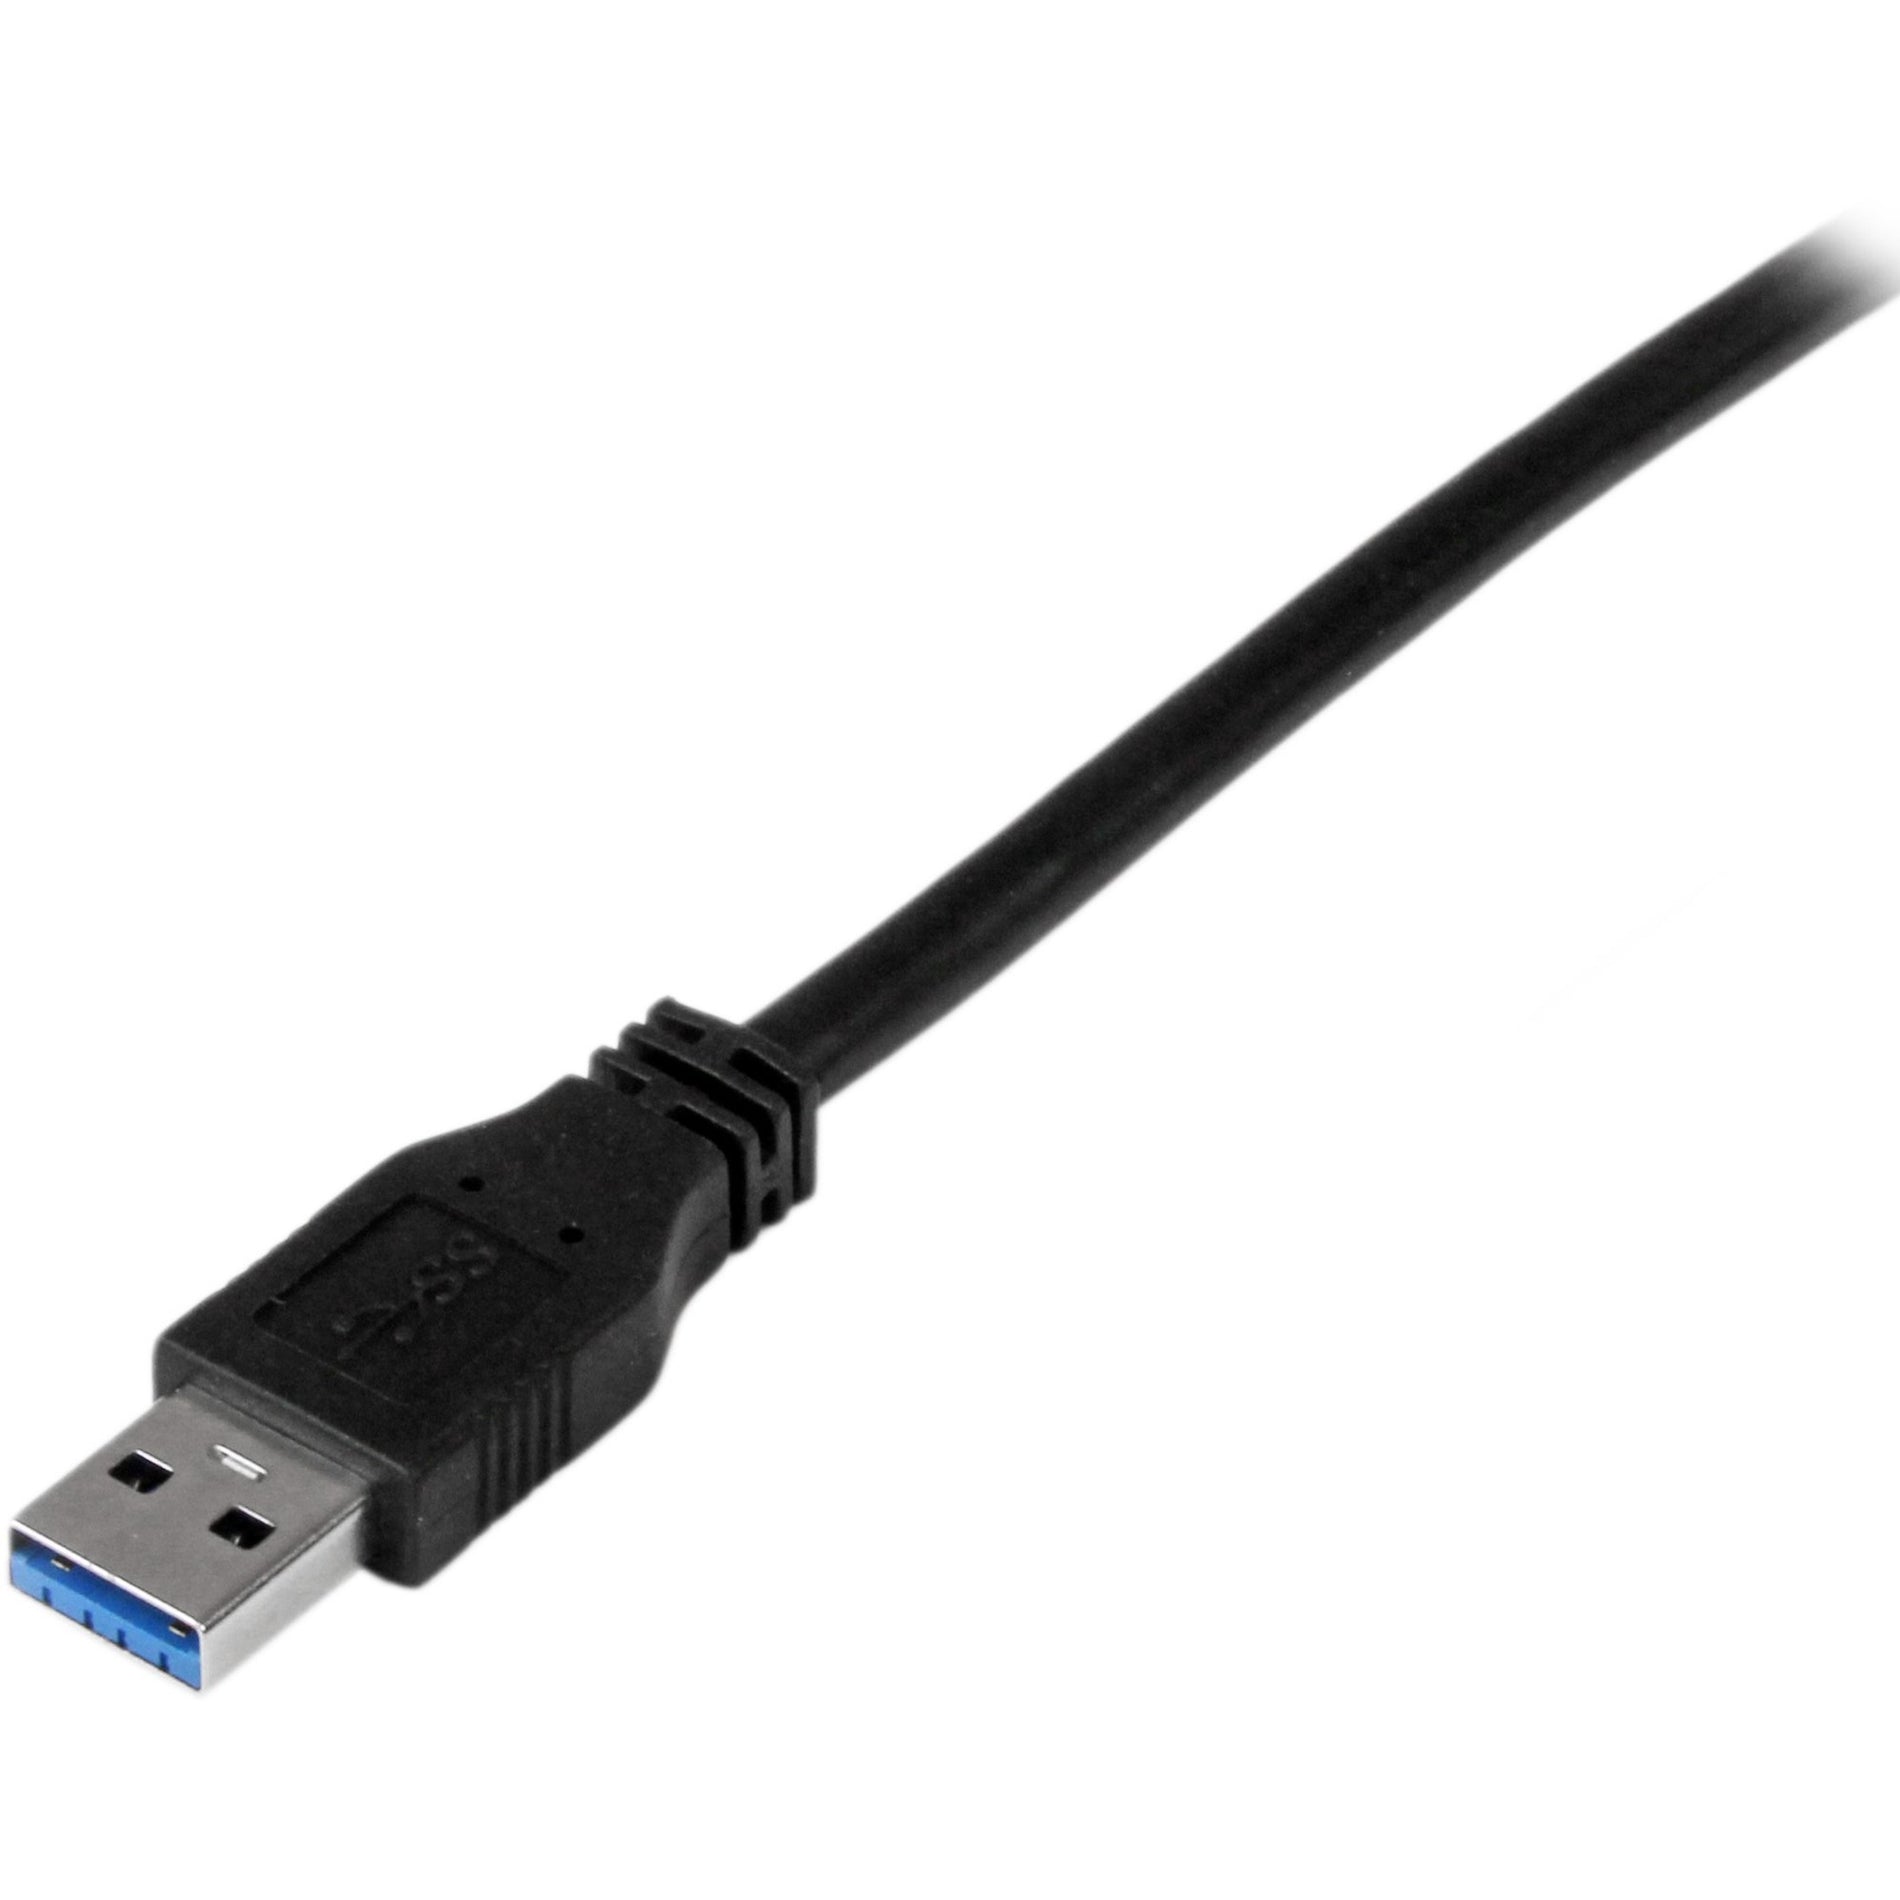 StarTech.com USB3CAB1M 1m Certified SuperSpeed USB 3.0 A to B Cable - M/M, 3ft Data Transfer Cable